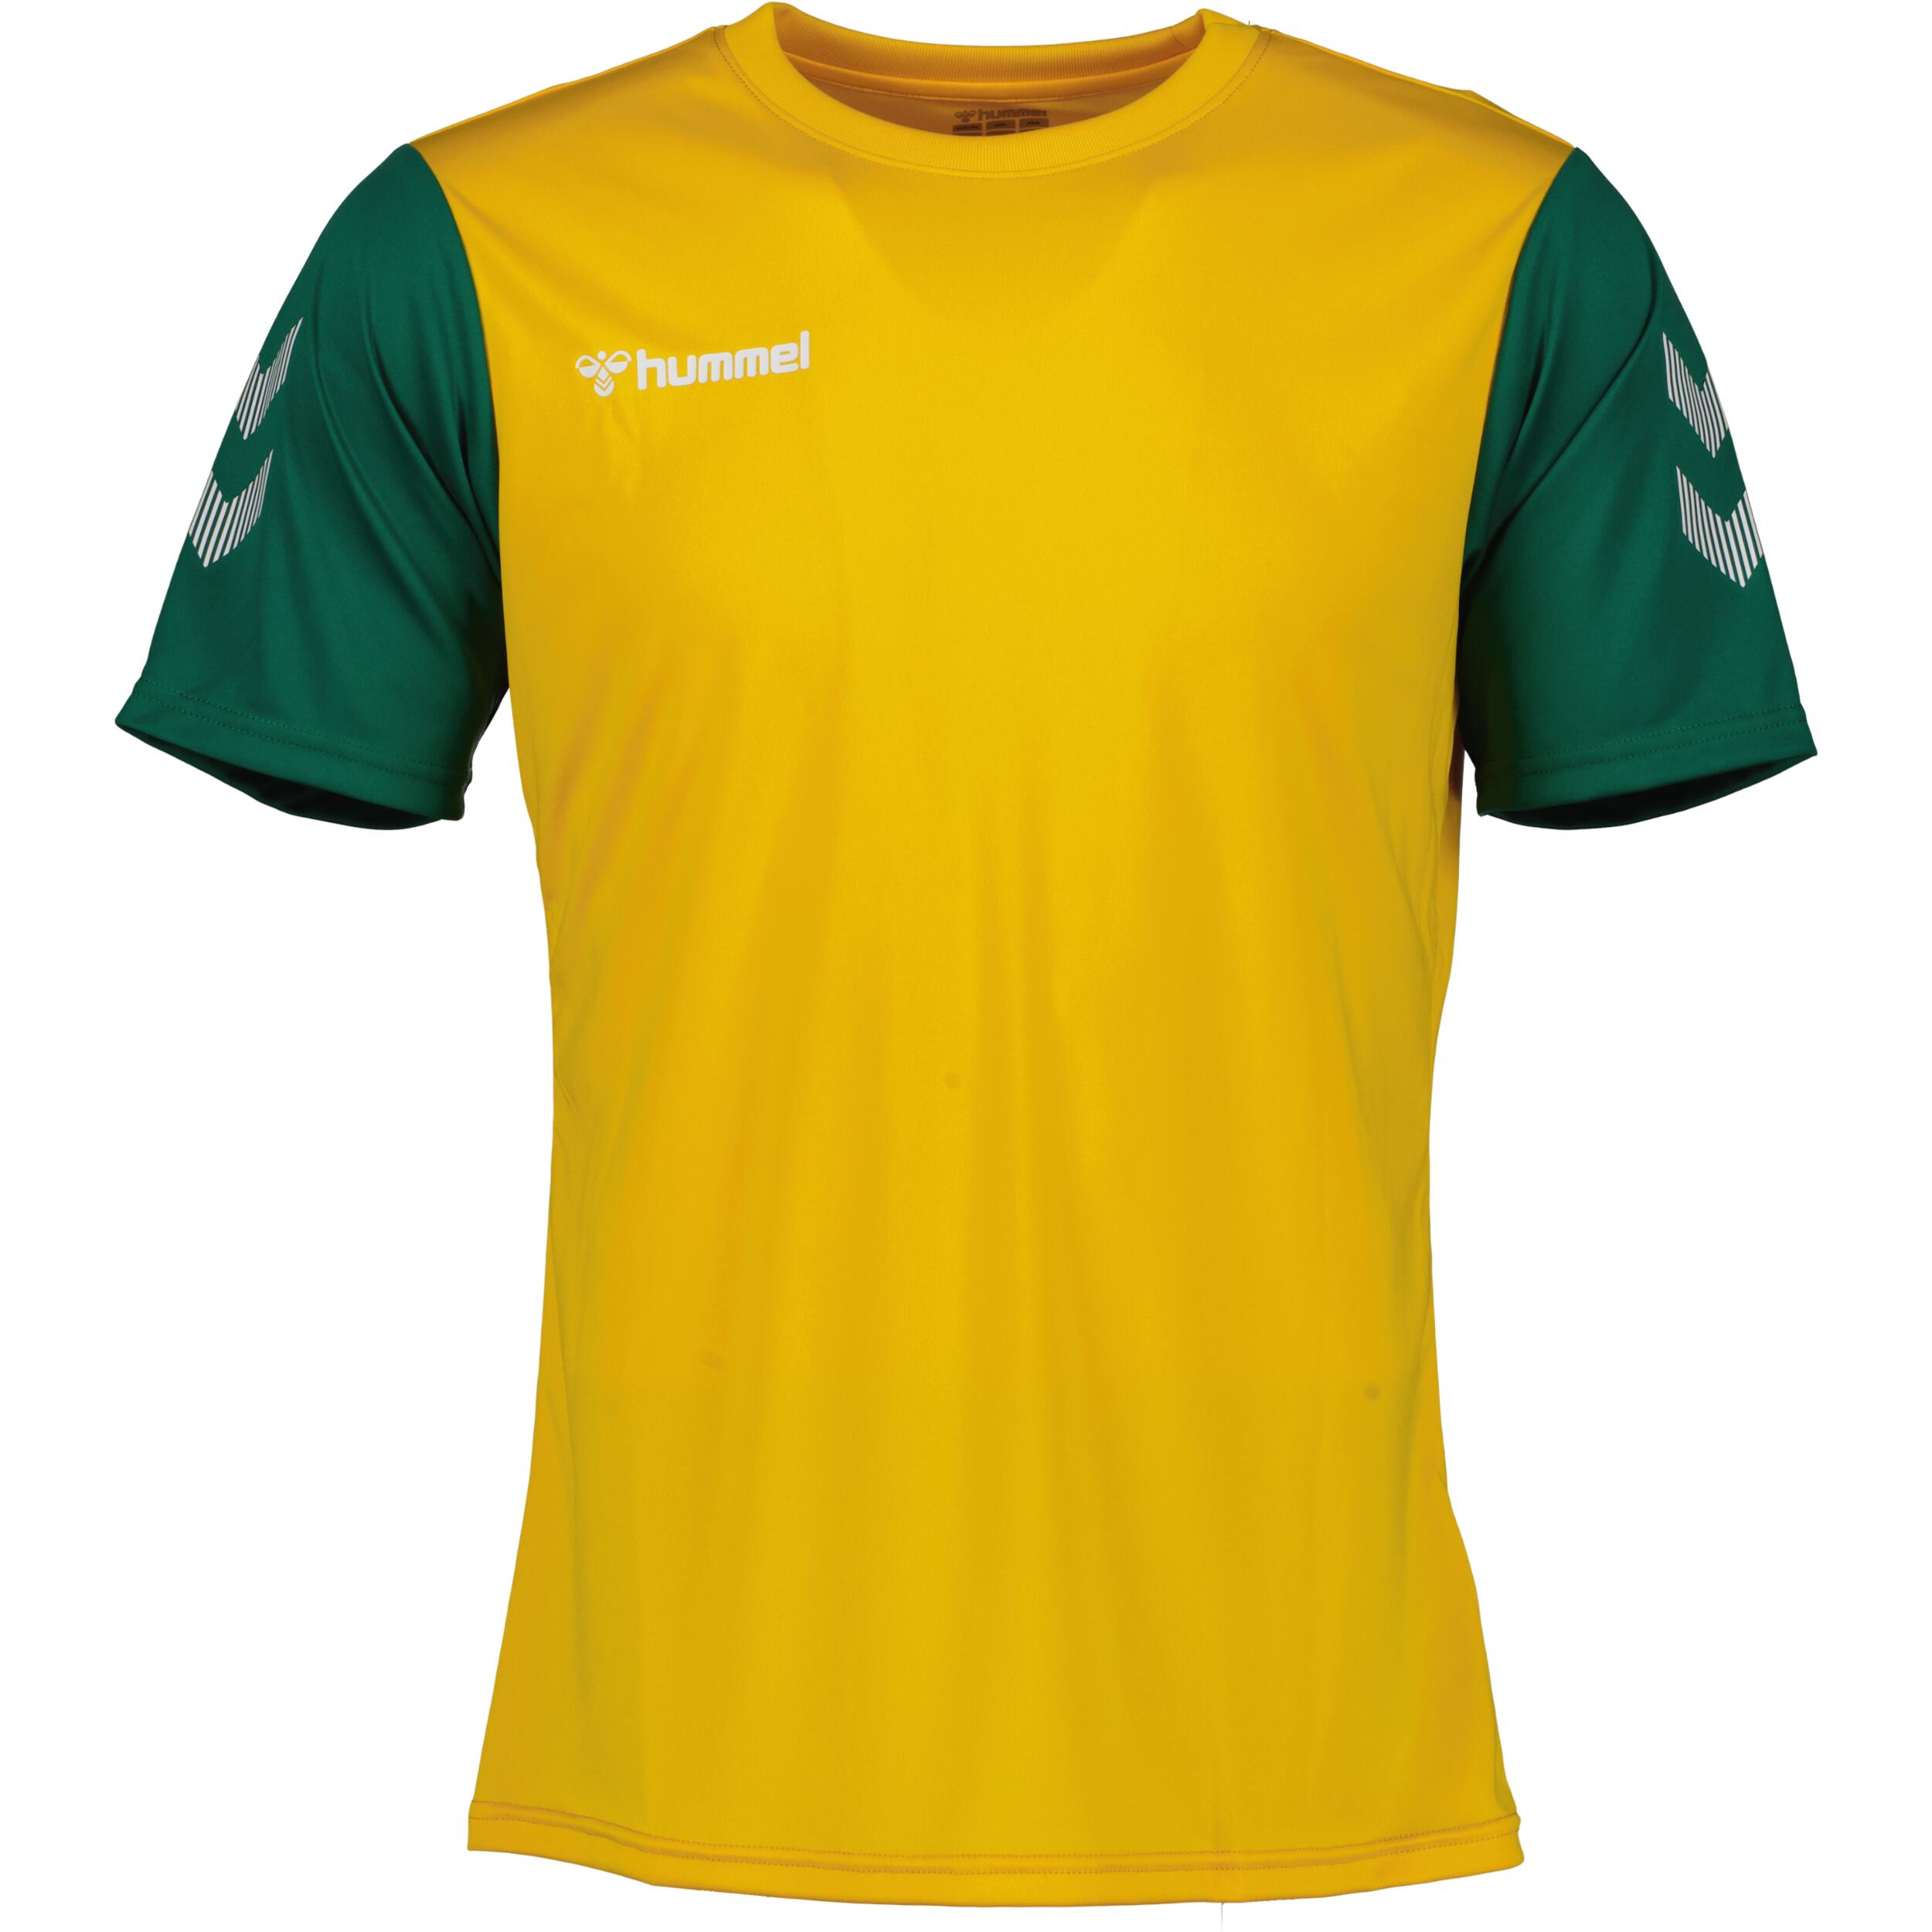 HUMMEL Match jersey for kids, great for football, in yellow/evergreen